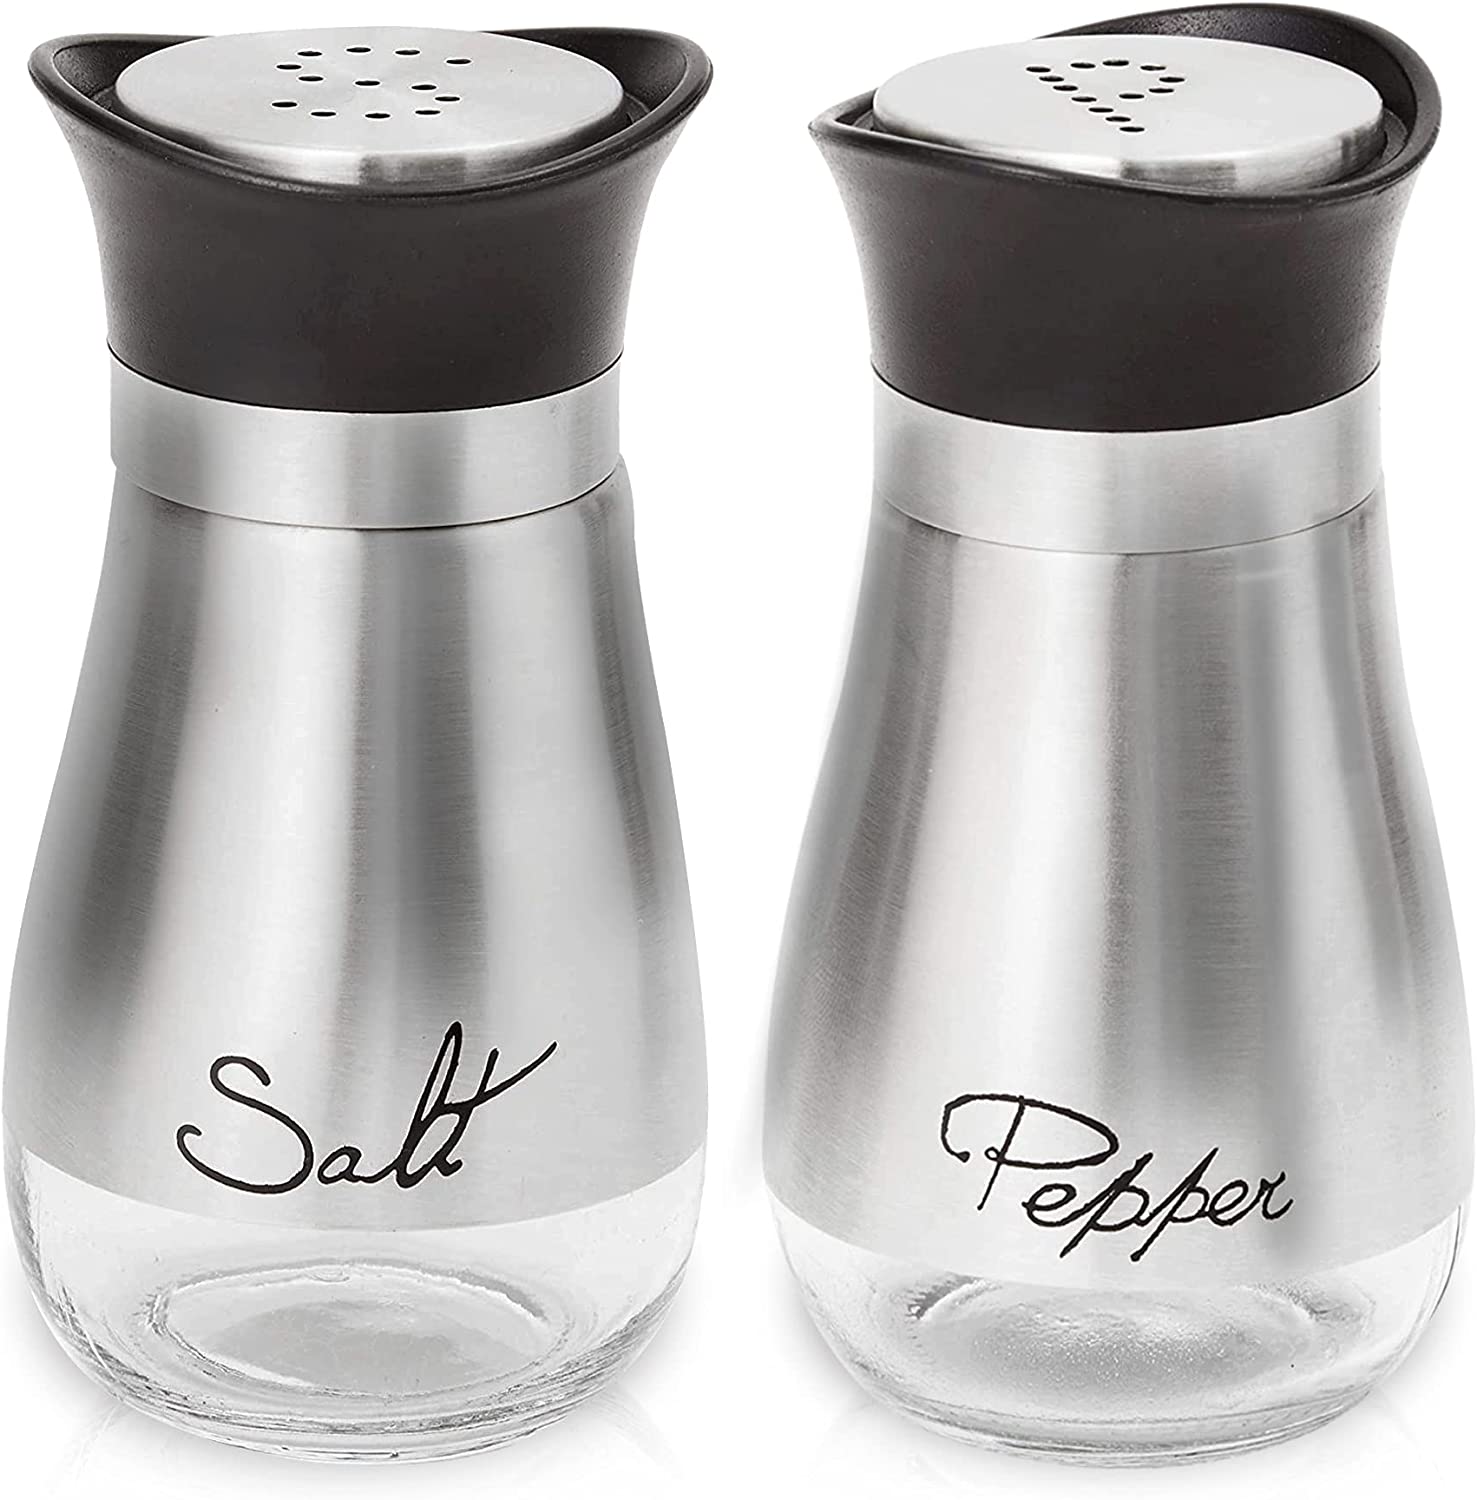 Salt and Pepper Shakers -  - Set of 2